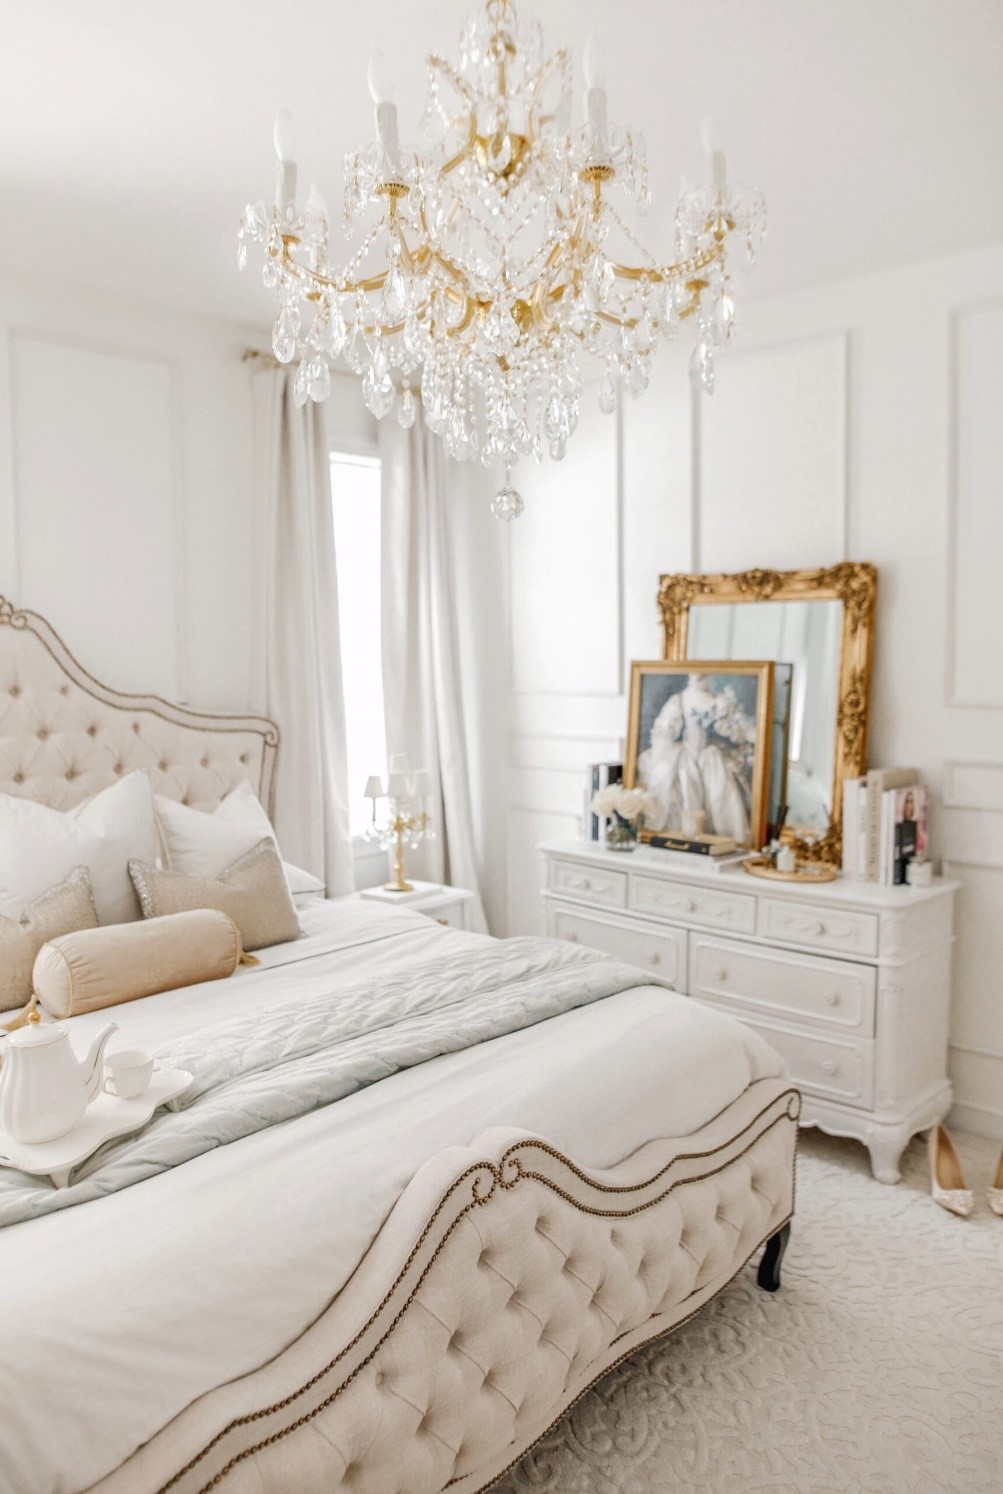 Parisian home interiors with dressing table and bed